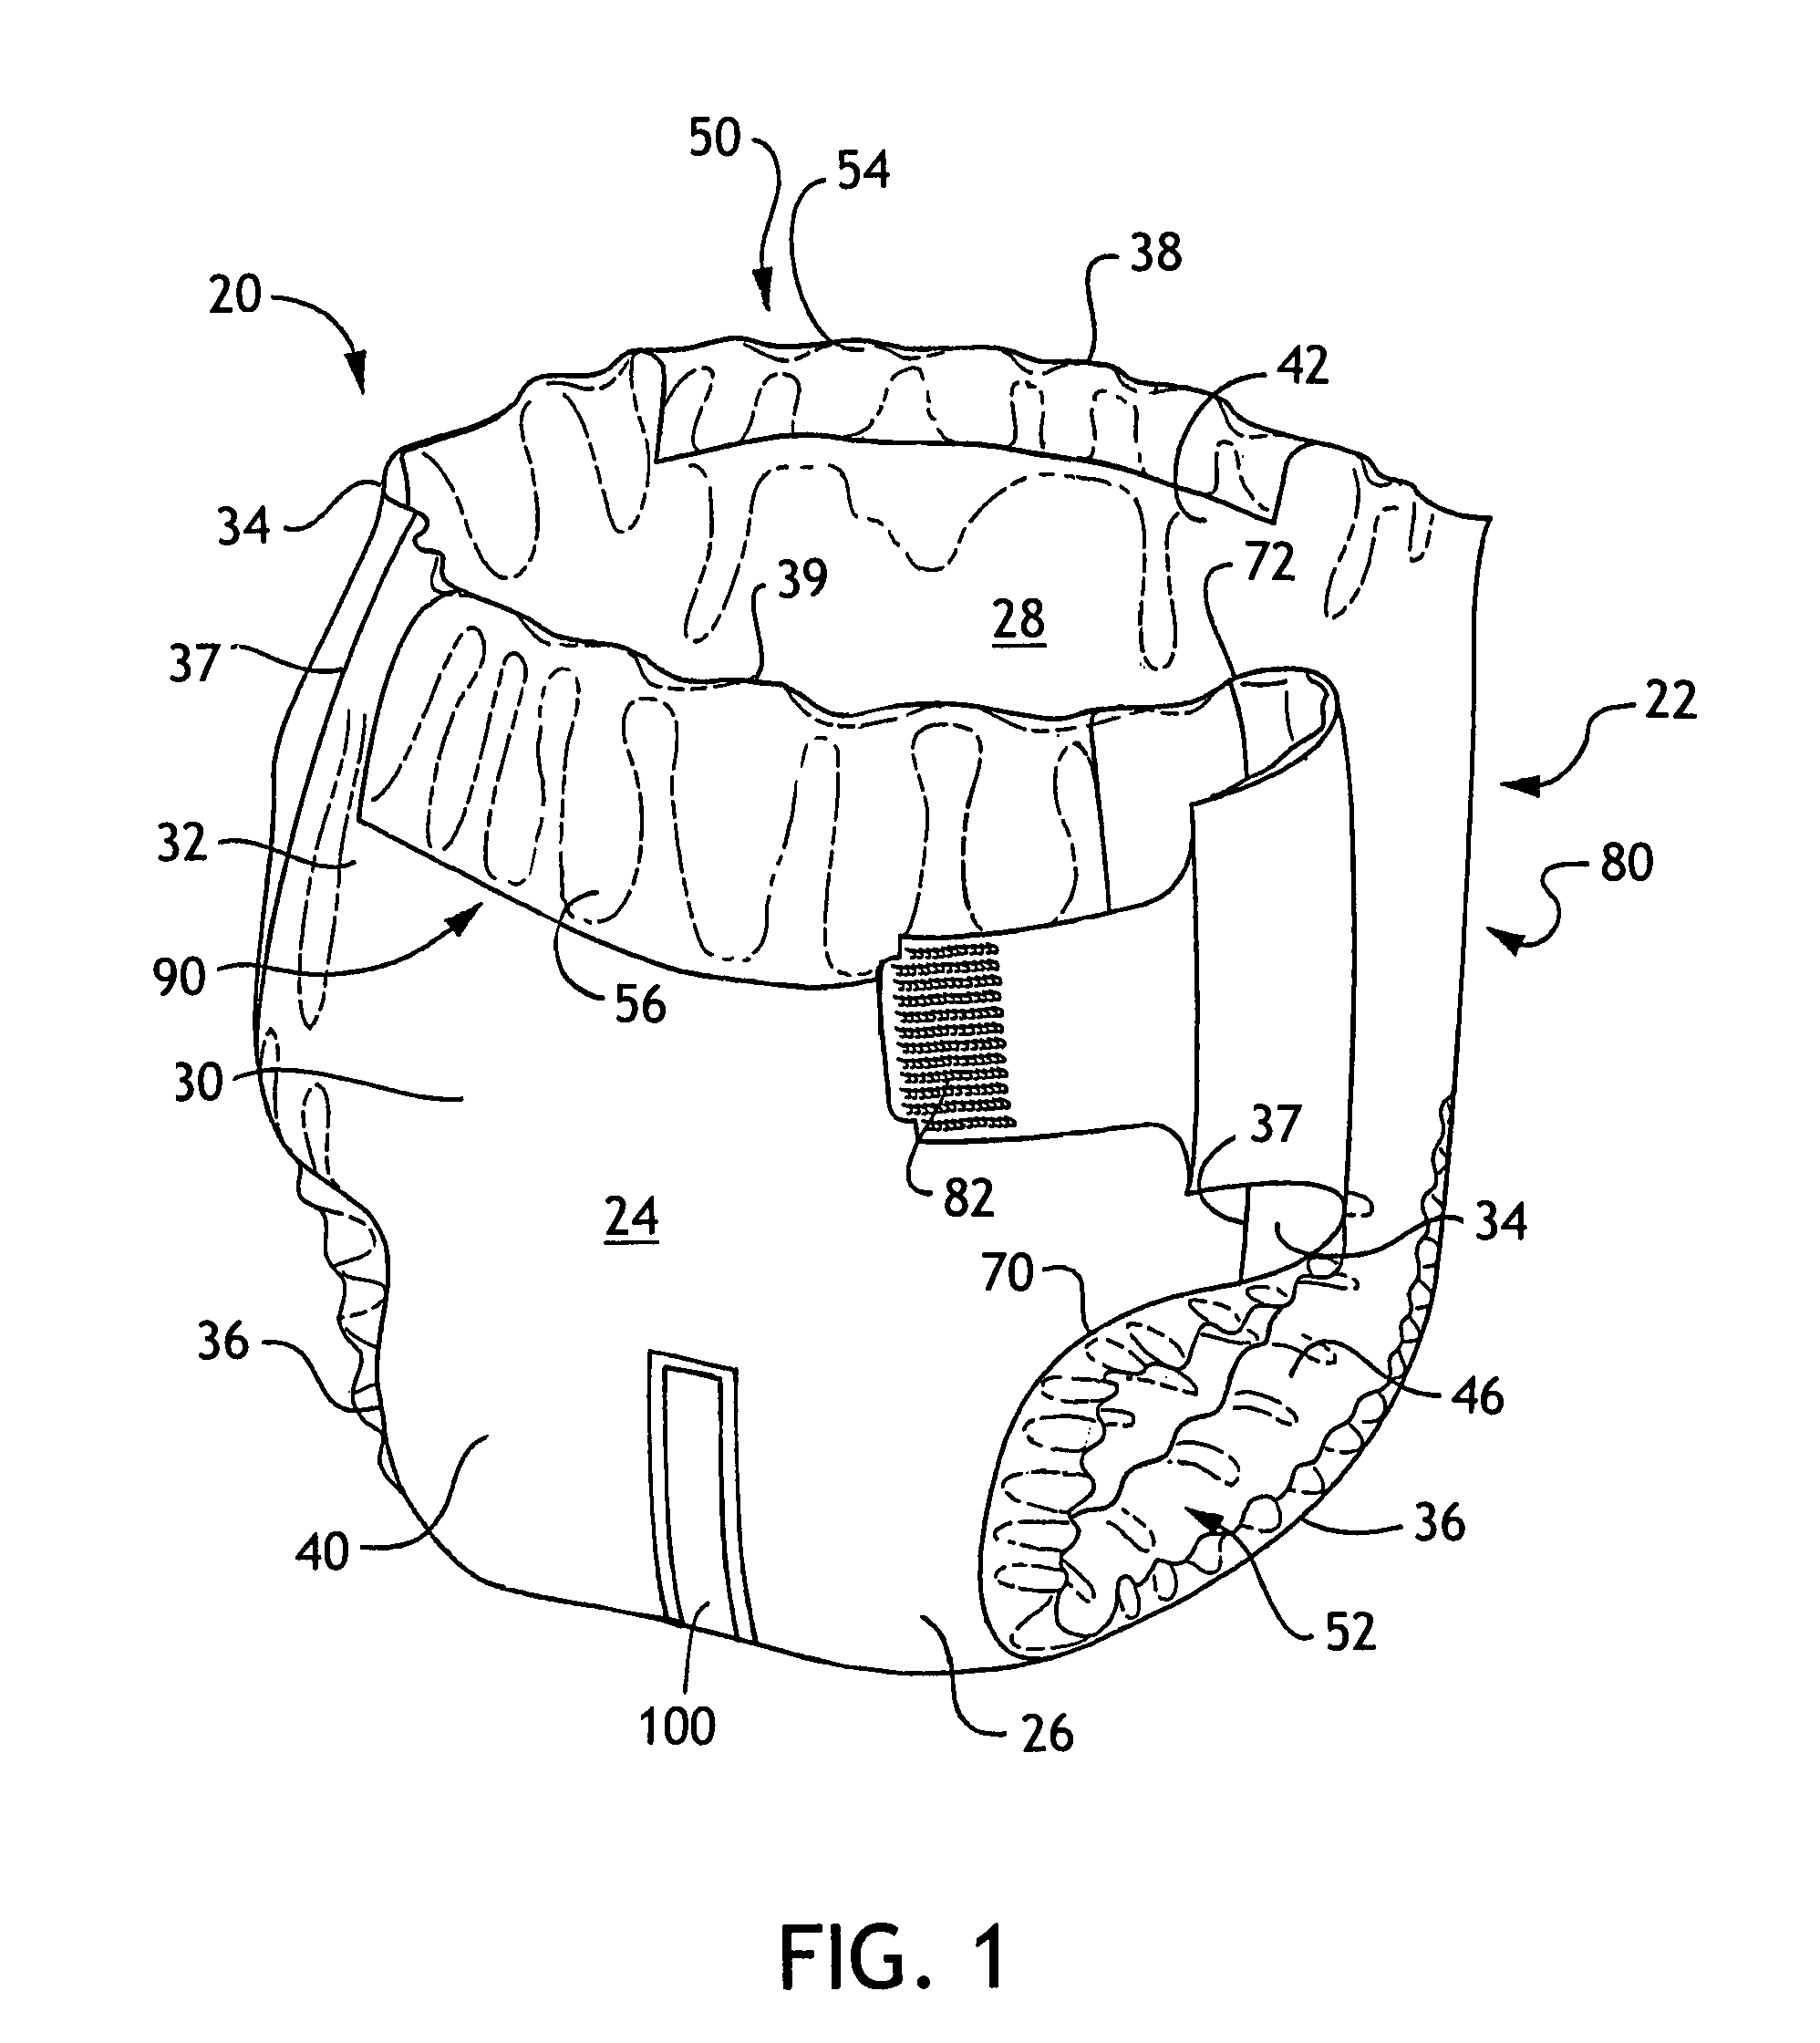 Absorbent articles including a body fluid signaling device